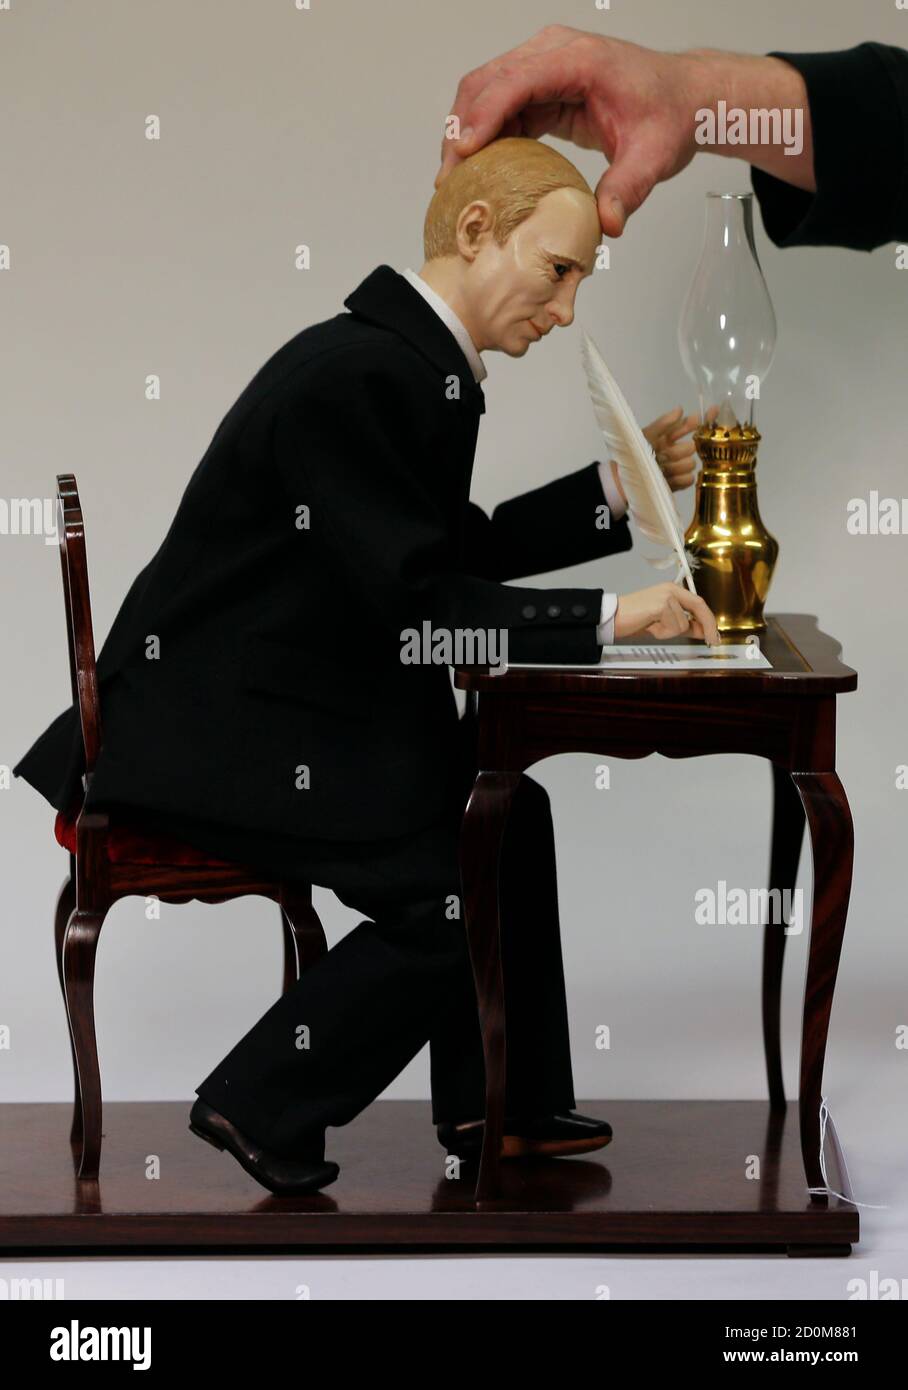 An employee of Technical Antiques Team Breker adjusts the head of a contemporary Musical Automaton depicting Russian President Vladimir Putin, in Cologne October 27, 2014. Inspired by Gustave Vichy's automaton 'Pierrot Ecrivain' of 1895, French artist Christian Baily of Paris portrays Putin signing the 'Treaty of Acceptance of the Republic Crimea into the Russian Federation' from March 18, 2014. The starting price of the automaton in the November 15 auction in Cologne, will be at 18,000 euros (US $ 22,900).  Putin is portrayed with blue glass eyes and molded hair, seated at a rosewood writing  Stock Photo